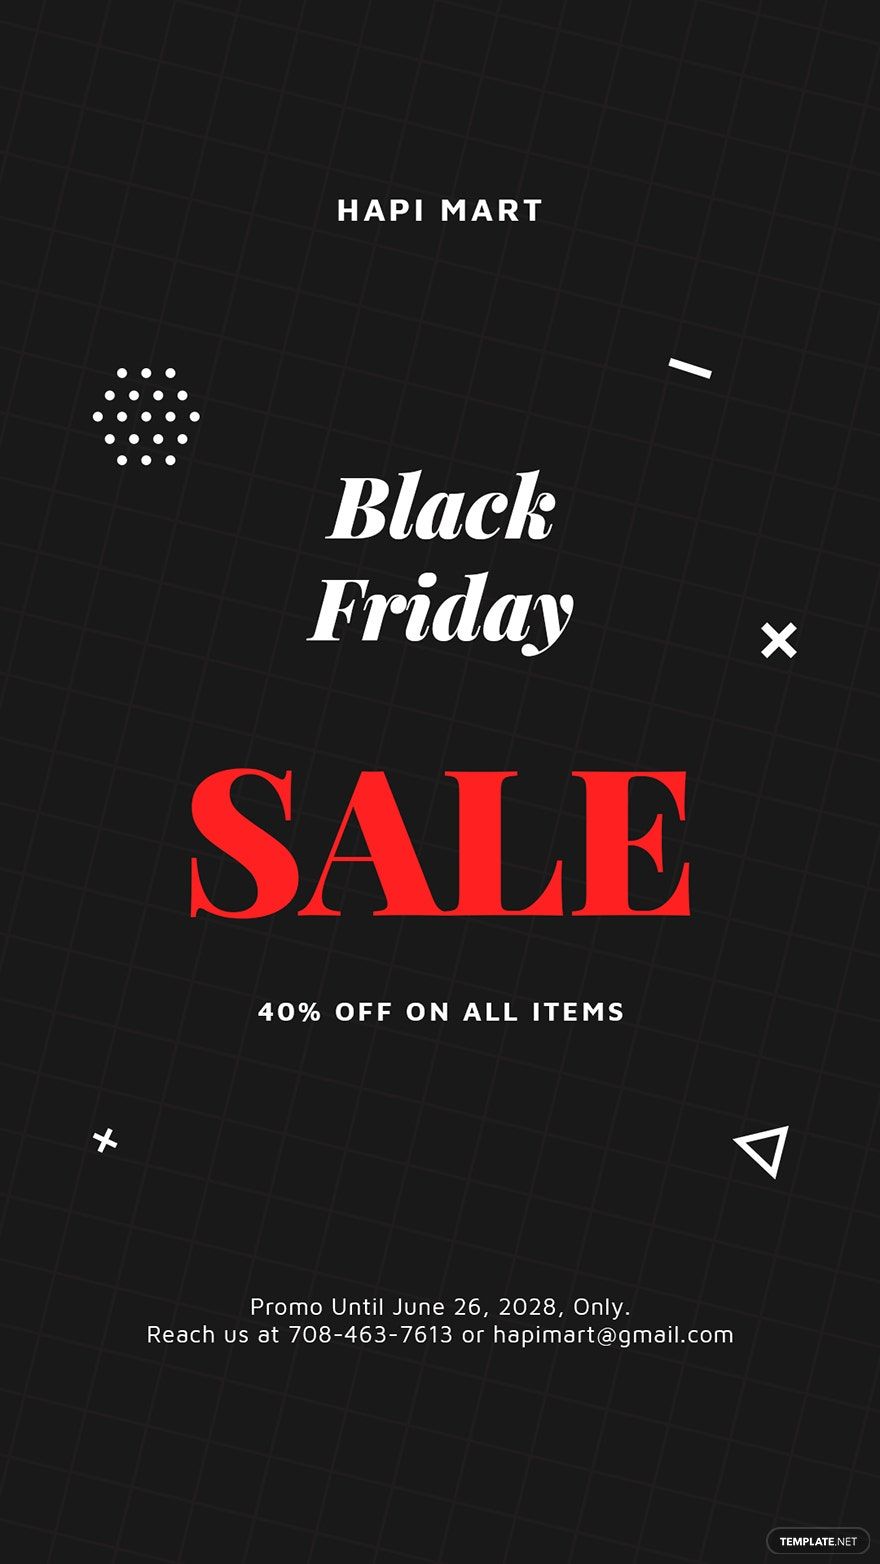 Black Friday Sale Whatsapp image Template in PSD